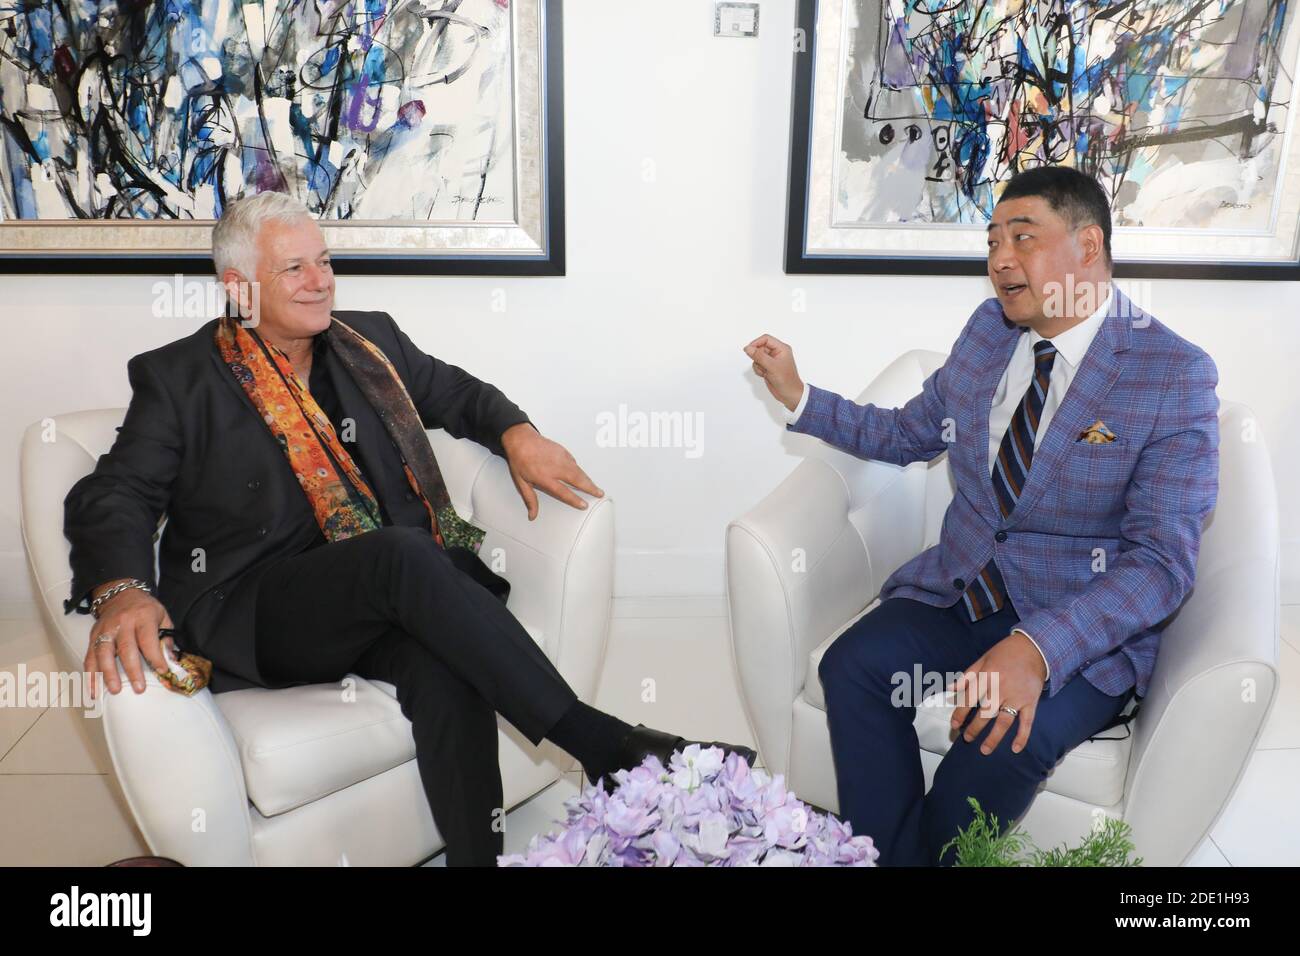 Beverly Hills, California.  27th November, 2020.  Art consultant /curator Michael Sean Degnan is interviewed by TV Host Joey Zhou for the Zhou Zheng Art Channel show at the Winn Slavin Fine Art Gallery in Beverly Hills, California.  Degnan is the Senior Art Advisor and Media Marketing Director for the Winn Slavin Fine Art Gallery,  Ambassador at Mondial Art Academia, and art consultant/curator in the fine art industry.  Joey Zhou is the host of the Zhou Zheng Art Channel and founder of the Los Angeles Beverly Arts (LABA) and The Beverly News. Credit:  Sheri Determan Stock Photo